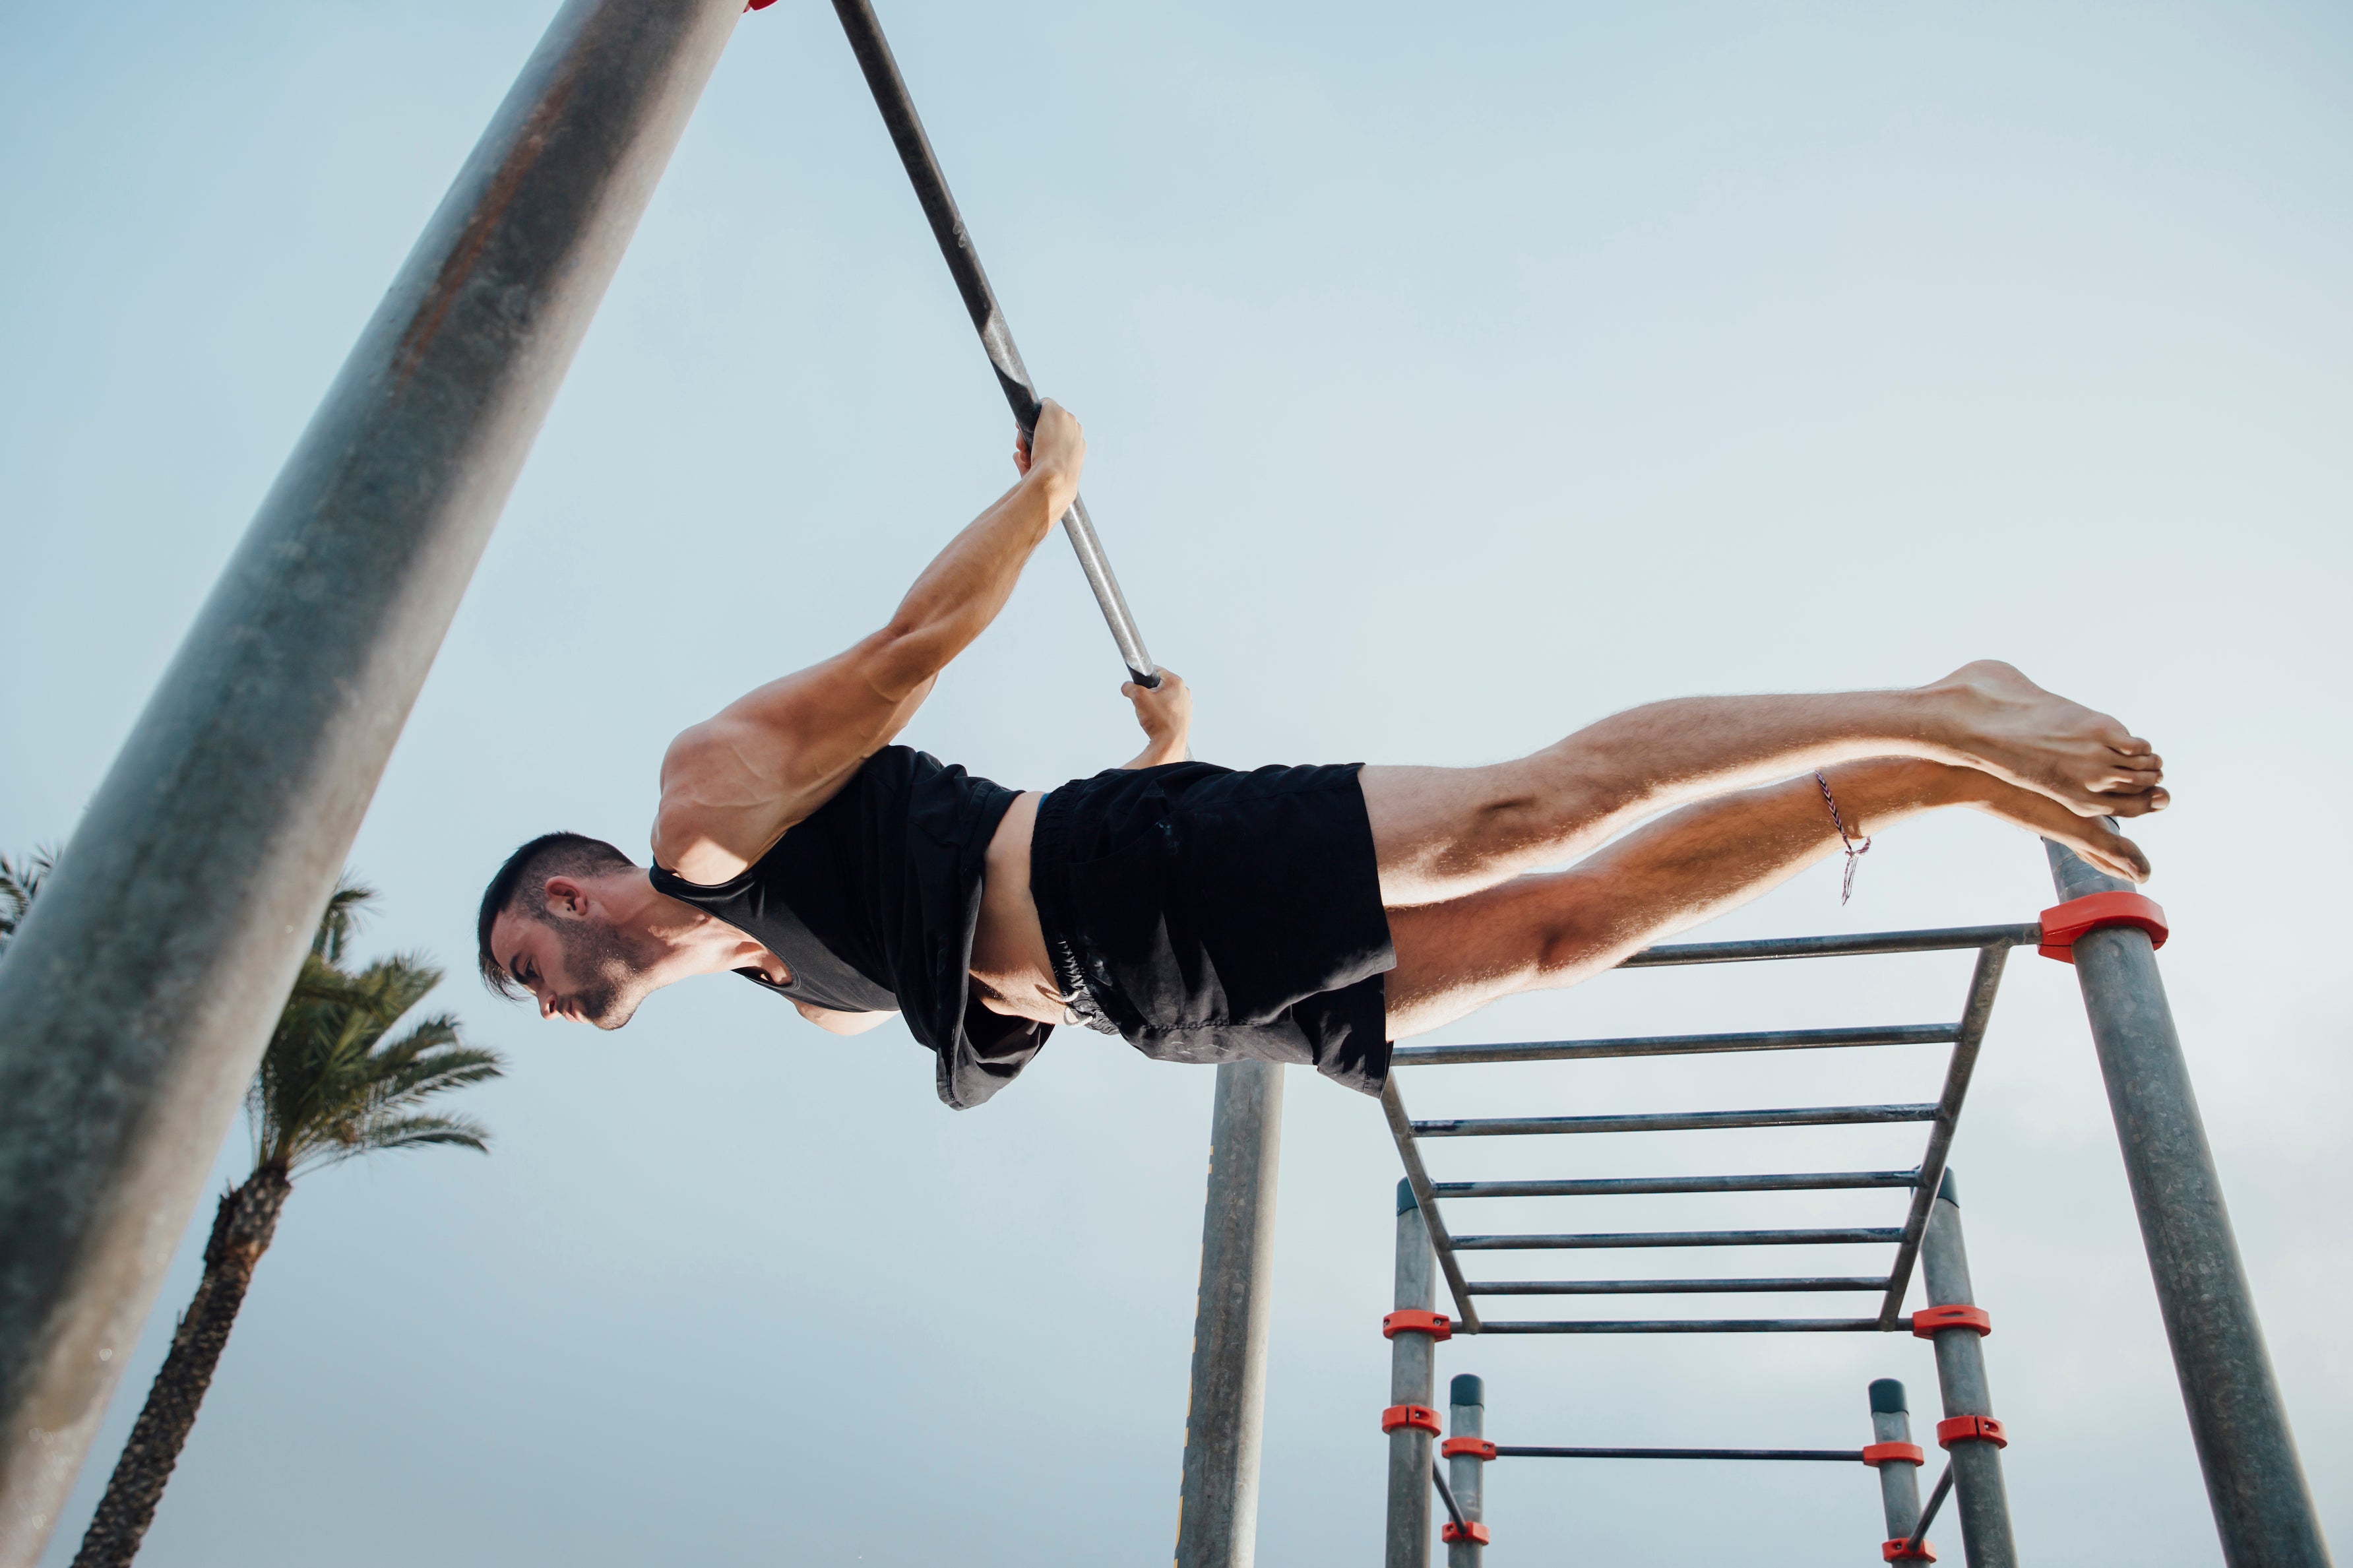 Street Workout - The Sport with your own Bodyweight